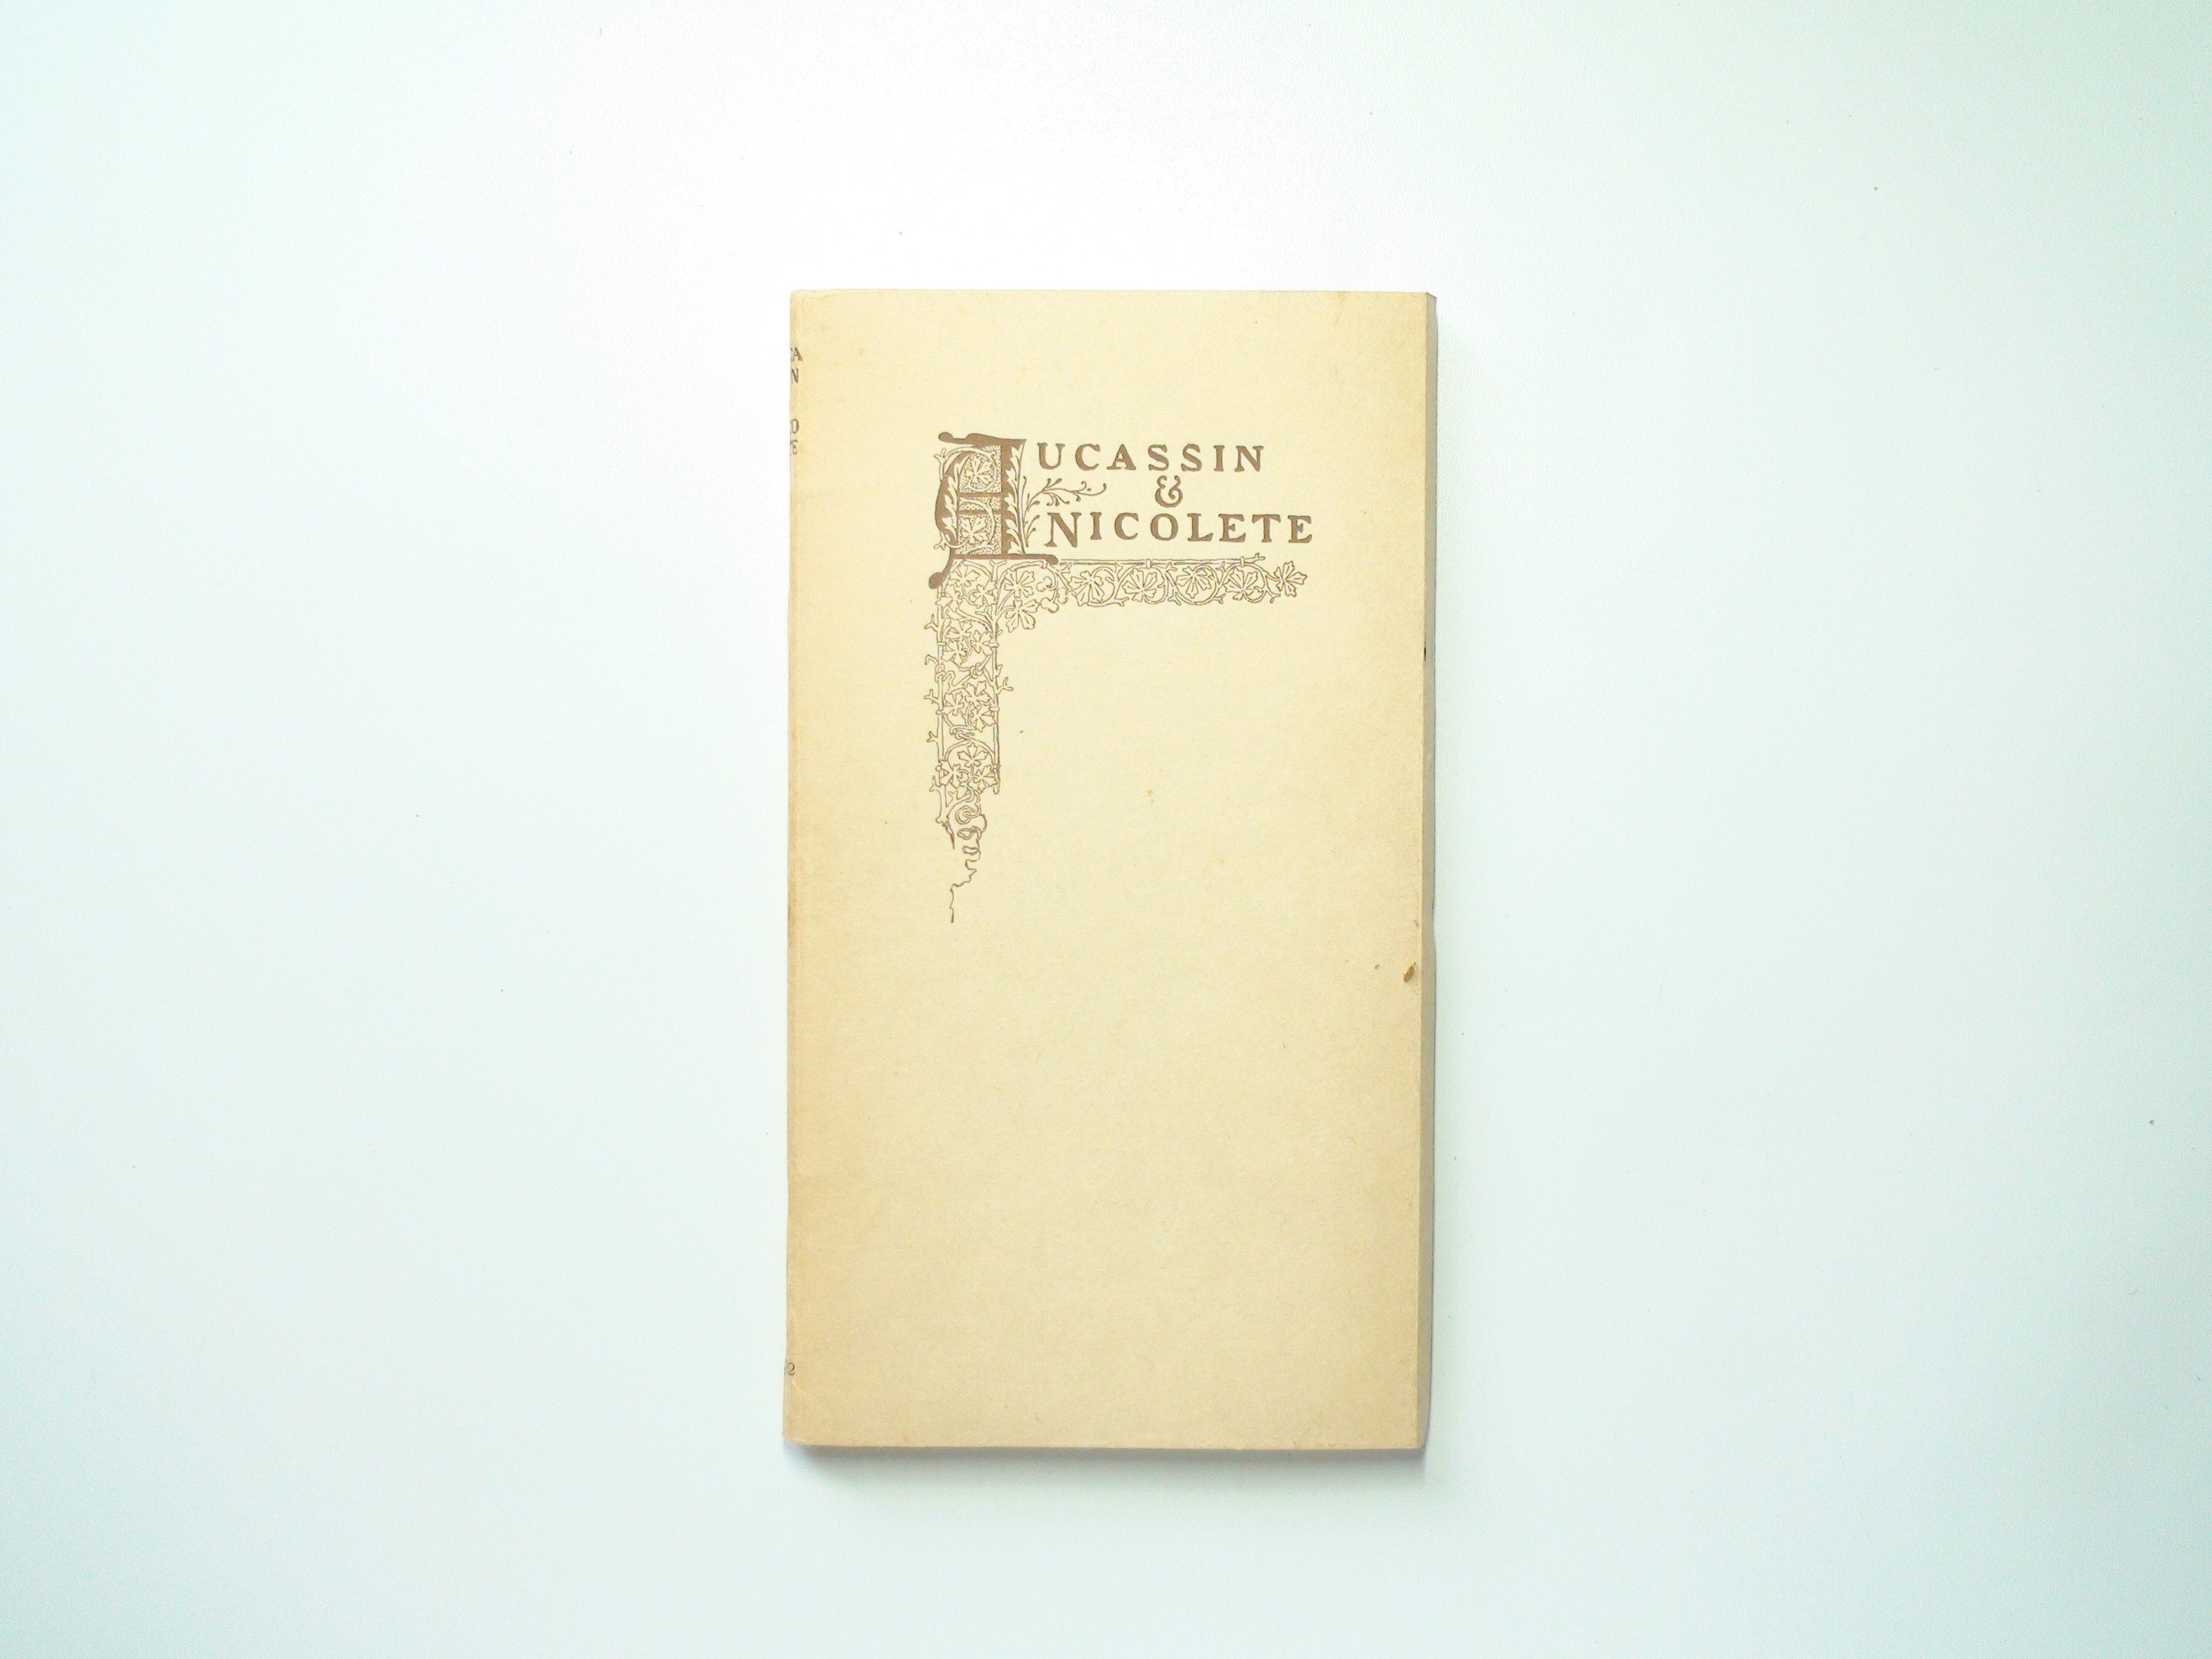 Aucassin and Nicolete, by Andrew Lang, Thomast B. Mosher, in Slipcase, 1922